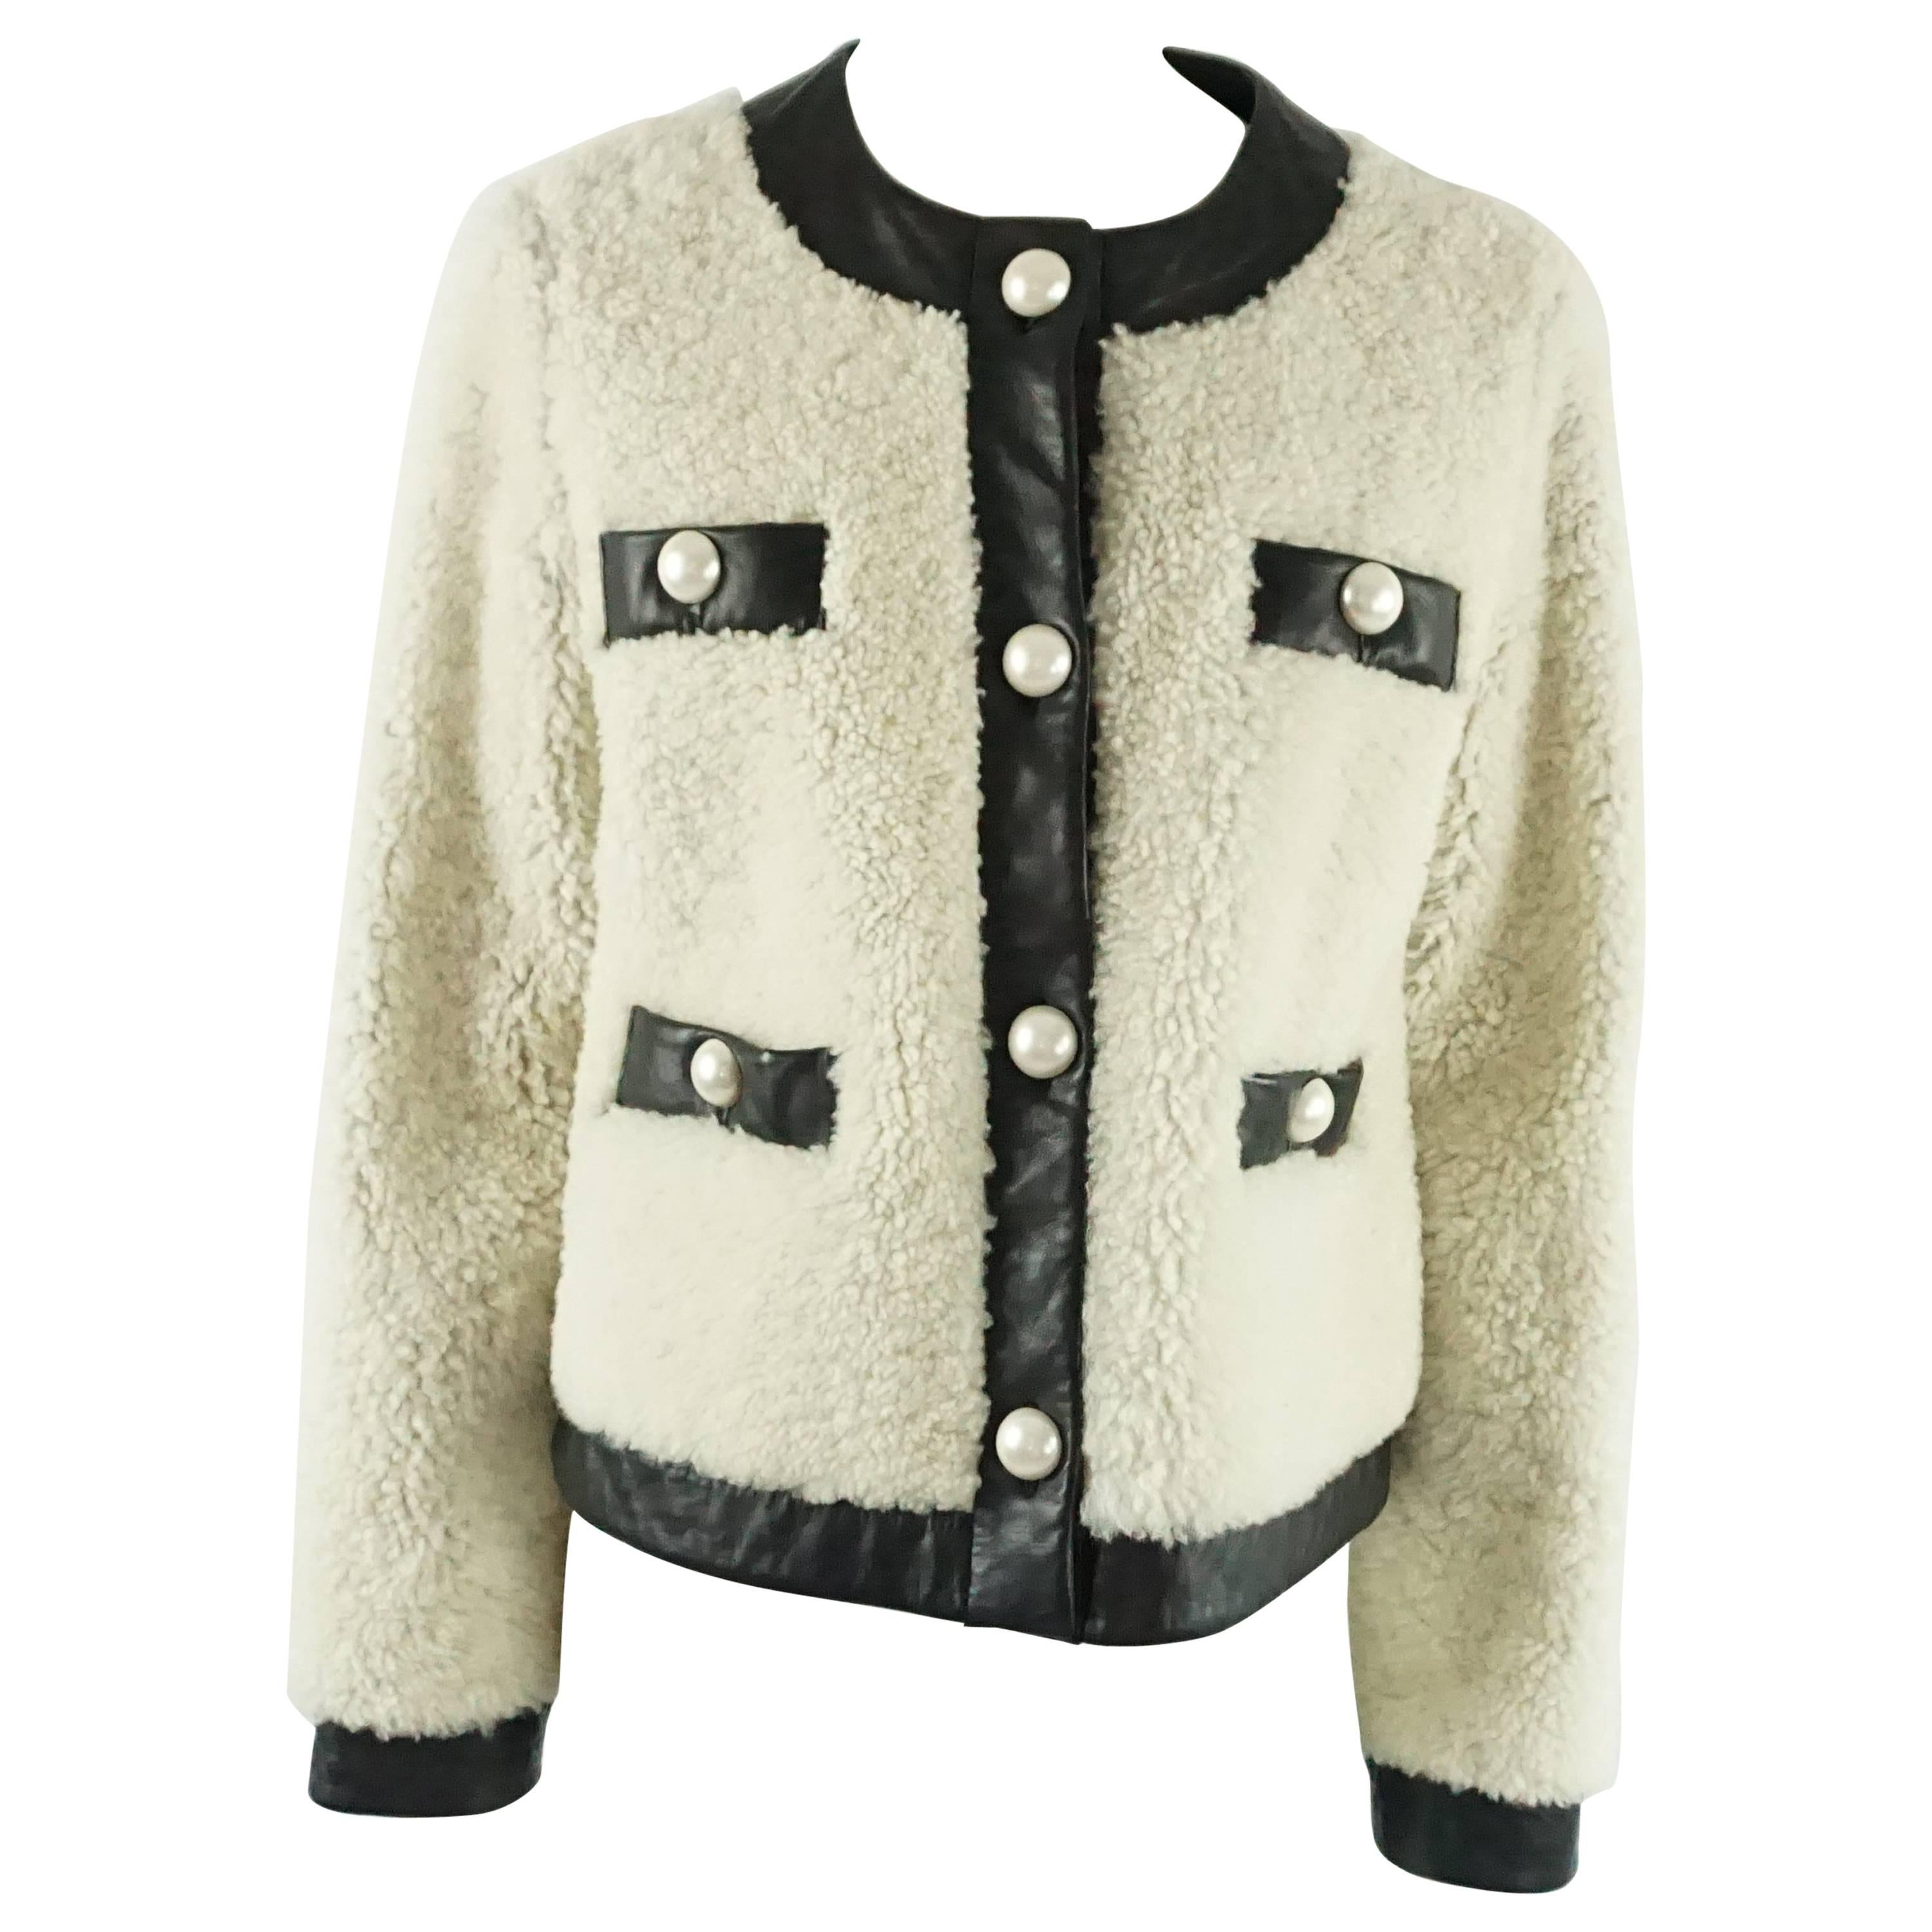 Moschino C&C Shearling and Leather Jacket with Faux Pearl Buttons - 8